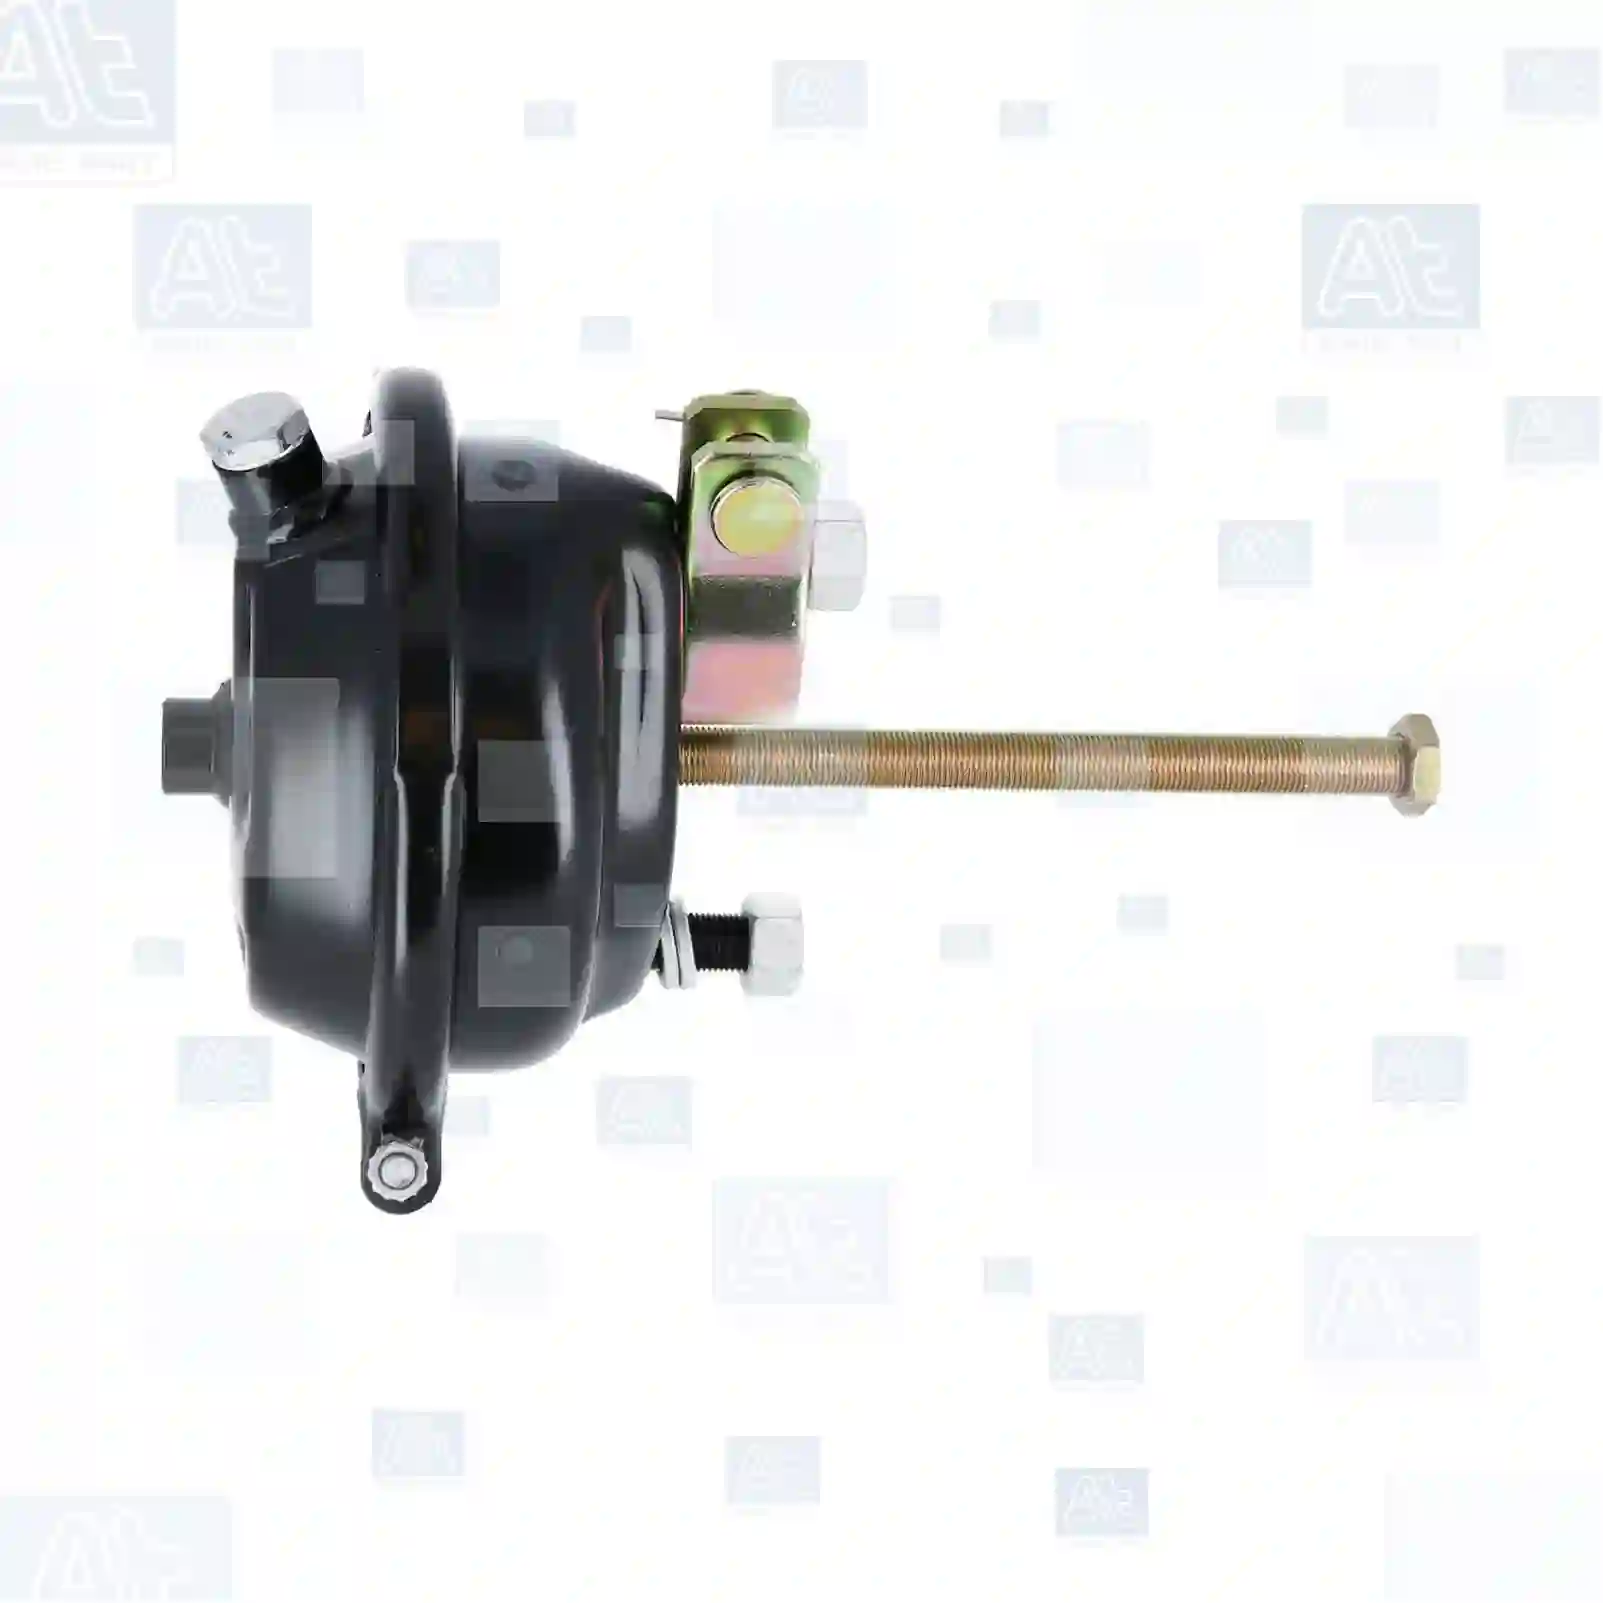 Brake cylinder, at no 77714636, oem no: 0203273100, 0544415010, 0544415100, 0544415110, 0834483, 834483, BBU5932, 1H312161609, ASX0014020, 175203, 77348, 79303, 84495, 10167586, 81511016058, 81511016059, 81511016080, 81511016081, 81511016082, 81511016083, 81511016104, 81511016105, 81511016110, 81511016111, 81511016114, 81511016115, 81511016135, 81511016136, 81511016313, 81511016314, 81511016315, 81511016328, 81511019104, 81511019105, 81511019314, 0004207424, 0004207524, 0004208924, 0004209024, 0004209124, 0004209224, 0004209324, 0014203524, 0014203624, 0014203724, 0014203824, 0014203924, 0014206724, 0014206824, 0014207424, 0044208618, 0044208718, 0064201618, 0064201718, 007010024, 011015181, 080220100, 0038855200, 4231069000, 5000464005, 5000464006, 5000464015, 5000465438, 5000465439, 5000809565, 5021170051, 7403987121, 1010154, 1102557, 1118473, 1331423, 1331430, 1738480, 295384, 051012, 1618592, 1618594, 3987121, 6212188, ZG50184-0008 At Spare Part | Engine, Accelerator Pedal, Camshaft, Connecting Rod, Crankcase, Crankshaft, Cylinder Head, Engine Suspension Mountings, Exhaust Manifold, Exhaust Gas Recirculation, Filter Kits, Flywheel Housing, General Overhaul Kits, Engine, Intake Manifold, Oil Cleaner, Oil Cooler, Oil Filter, Oil Pump, Oil Sump, Piston & Liner, Sensor & Switch, Timing Case, Turbocharger, Cooling System, Belt Tensioner, Coolant Filter, Coolant Pipe, Corrosion Prevention Agent, Drive, Expansion Tank, Fan, Intercooler, Monitors & Gauges, Radiator, Thermostat, V-Belt / Timing belt, Water Pump, Fuel System, Electronical Injector Unit, Feed Pump, Fuel Filter, cpl., Fuel Gauge Sender,  Fuel Line, Fuel Pump, Fuel Tank, Injection Line Kit, Injection Pump, Exhaust System, Clutch & Pedal, Gearbox, Propeller Shaft, Axles, Brake System, Hubs & Wheels, Suspension, Leaf Spring, Universal Parts / Accessories, Steering, Electrical System, Cabin Brake cylinder, at no 77714636, oem no: 0203273100, 0544415010, 0544415100, 0544415110, 0834483, 834483, BBU5932, 1H312161609, ASX0014020, 175203, 77348, 79303, 84495, 10167586, 81511016058, 81511016059, 81511016080, 81511016081, 81511016082, 81511016083, 81511016104, 81511016105, 81511016110, 81511016111, 81511016114, 81511016115, 81511016135, 81511016136, 81511016313, 81511016314, 81511016315, 81511016328, 81511019104, 81511019105, 81511019314, 0004207424, 0004207524, 0004208924, 0004209024, 0004209124, 0004209224, 0004209324, 0014203524, 0014203624, 0014203724, 0014203824, 0014203924, 0014206724, 0014206824, 0014207424, 0044208618, 0044208718, 0064201618, 0064201718, 007010024, 011015181, 080220100, 0038855200, 4231069000, 5000464005, 5000464006, 5000464015, 5000465438, 5000465439, 5000809565, 5021170051, 7403987121, 1010154, 1102557, 1118473, 1331423, 1331430, 1738480, 295384, 051012, 1618592, 1618594, 3987121, 6212188, ZG50184-0008 At Spare Part | Engine, Accelerator Pedal, Camshaft, Connecting Rod, Crankcase, Crankshaft, Cylinder Head, Engine Suspension Mountings, Exhaust Manifold, Exhaust Gas Recirculation, Filter Kits, Flywheel Housing, General Overhaul Kits, Engine, Intake Manifold, Oil Cleaner, Oil Cooler, Oil Filter, Oil Pump, Oil Sump, Piston & Liner, Sensor & Switch, Timing Case, Turbocharger, Cooling System, Belt Tensioner, Coolant Filter, Coolant Pipe, Corrosion Prevention Agent, Drive, Expansion Tank, Fan, Intercooler, Monitors & Gauges, Radiator, Thermostat, V-Belt / Timing belt, Water Pump, Fuel System, Electronical Injector Unit, Feed Pump, Fuel Filter, cpl., Fuel Gauge Sender,  Fuel Line, Fuel Pump, Fuel Tank, Injection Line Kit, Injection Pump, Exhaust System, Clutch & Pedal, Gearbox, Propeller Shaft, Axles, Brake System, Hubs & Wheels, Suspension, Leaf Spring, Universal Parts / Accessories, Steering, Electrical System, Cabin